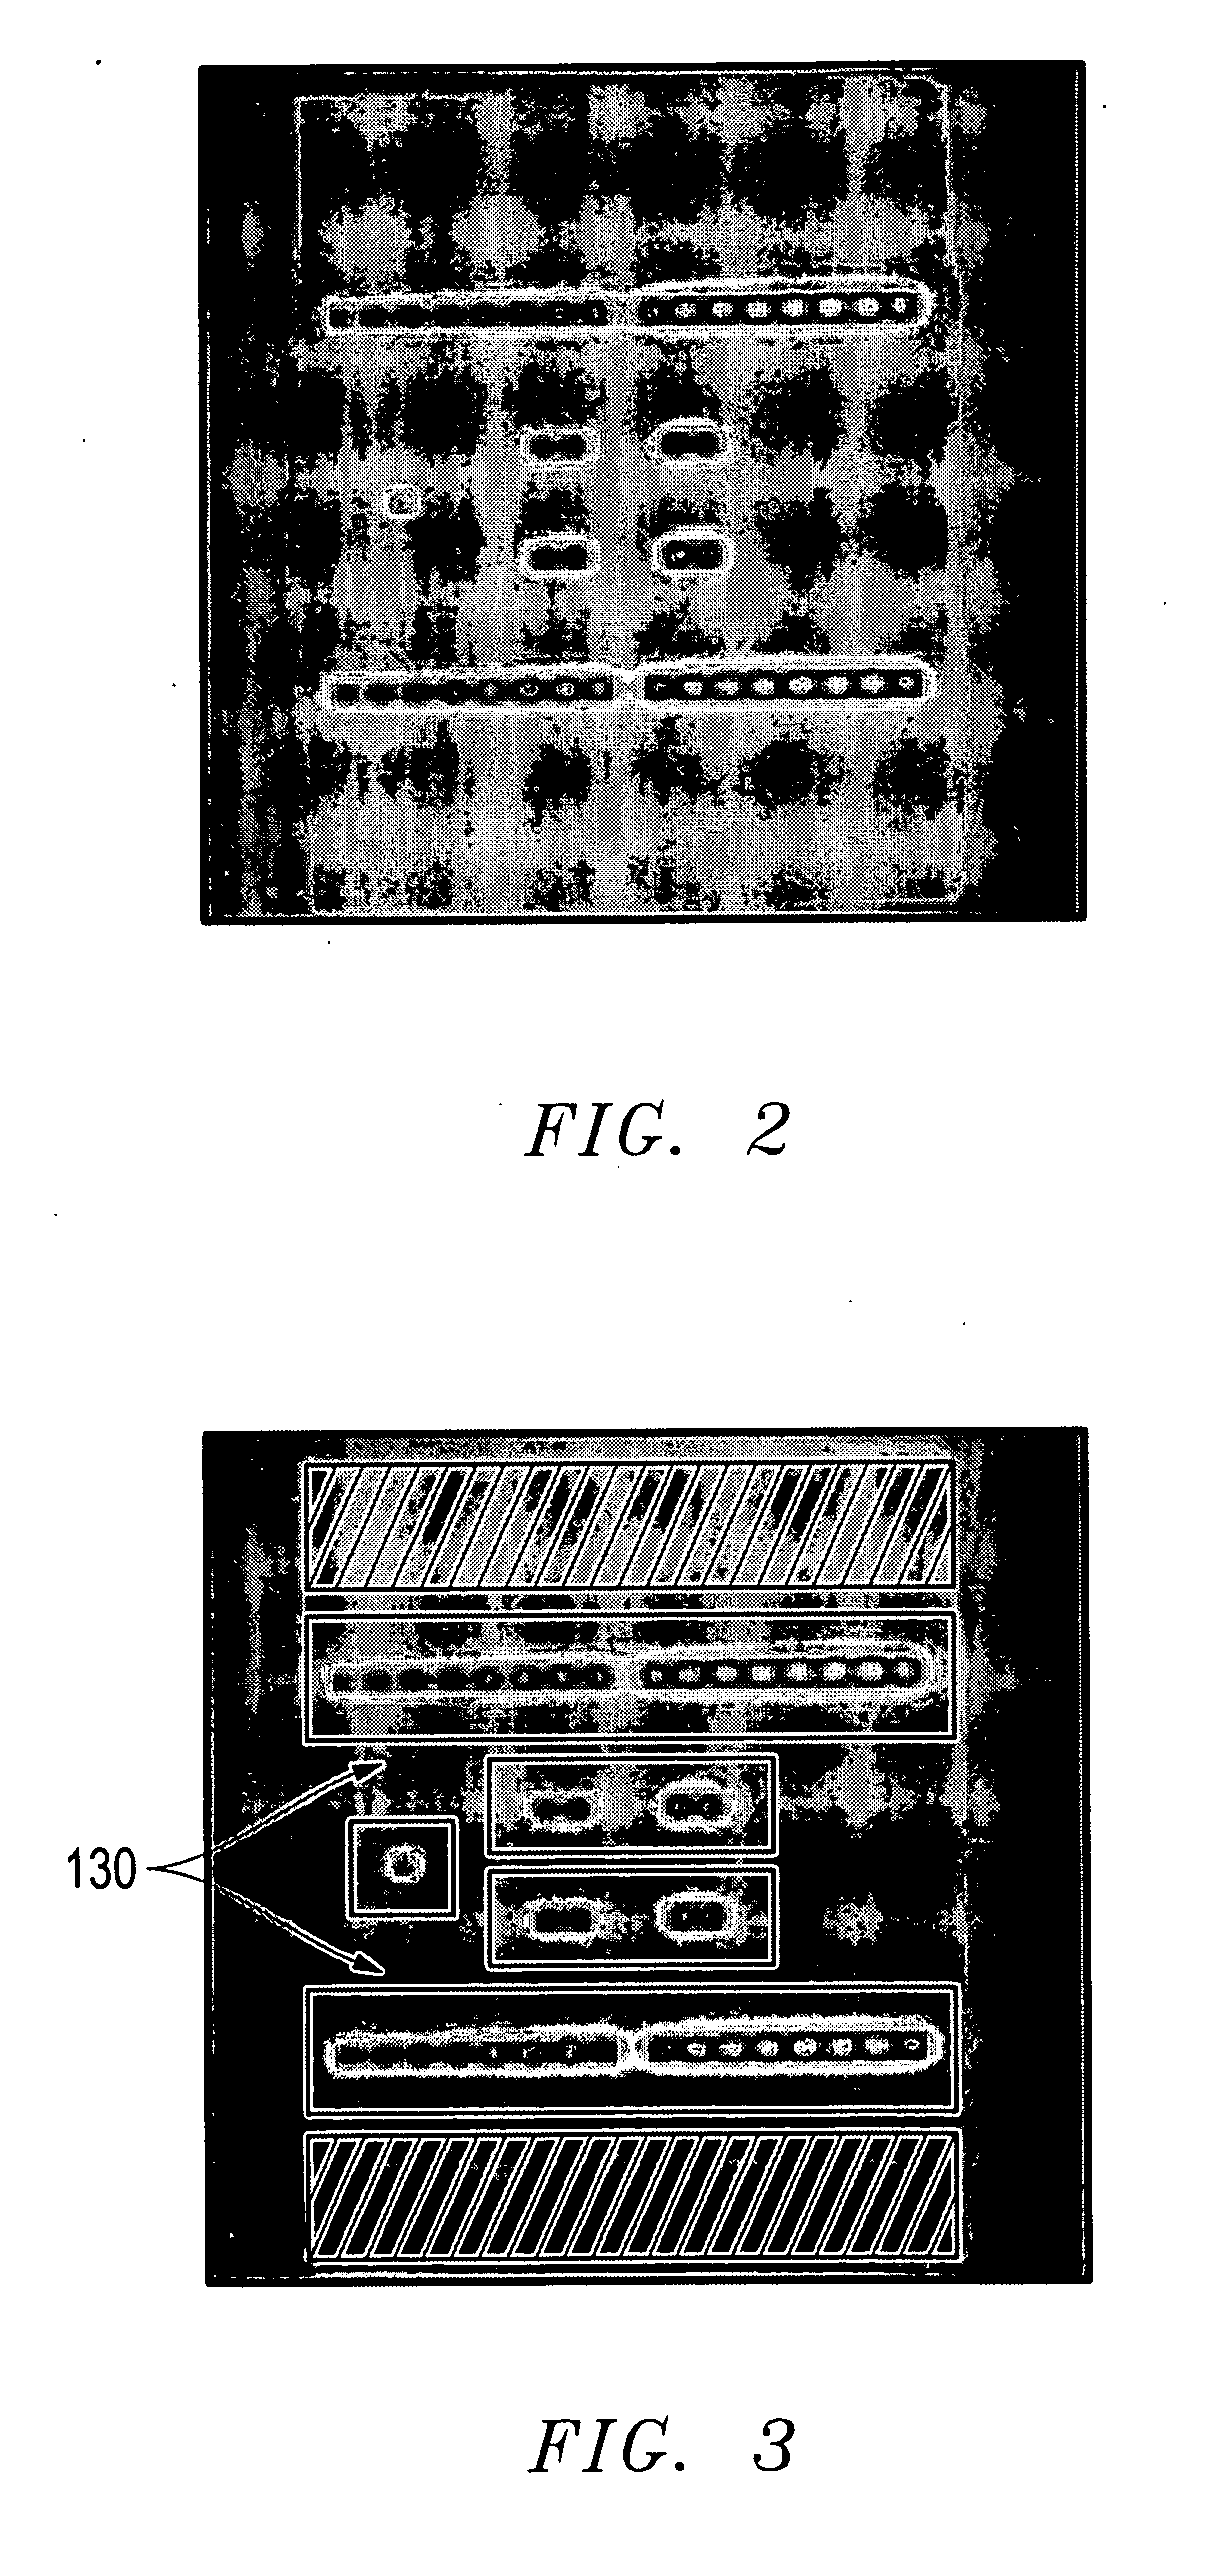 Reliability improvement in a compound semiconductor mmic